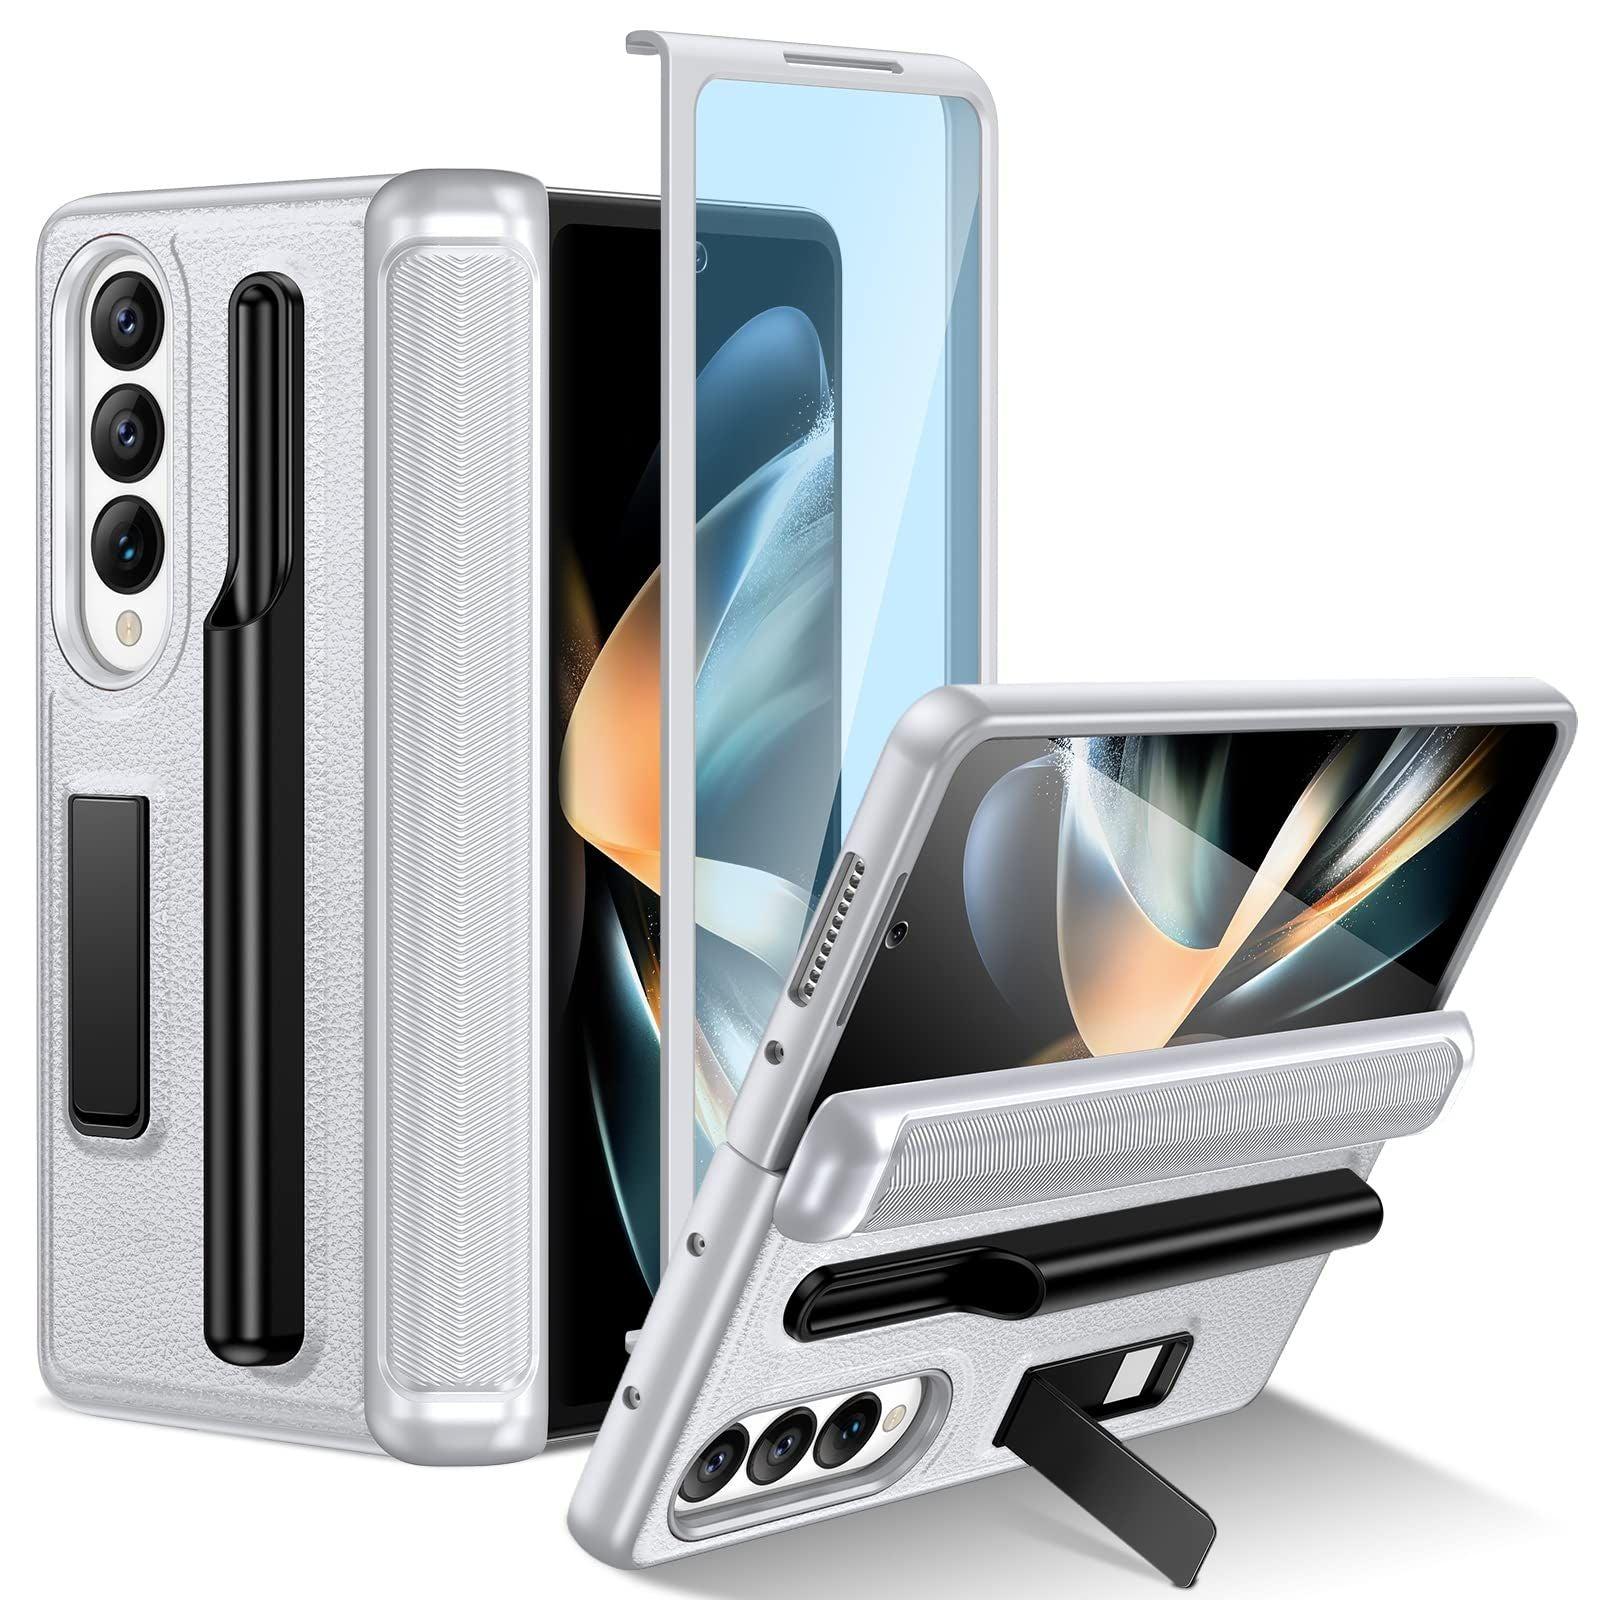 HWeggo for Samsung Galaxy Z Fold 4 Case with S Pen Holder and Kickstand,Samsung Z Fold 4 Case with Front Screen Protector,Hard PC Shockproof Anti-Scratch Hinge Coverage Protective Cover(Sliver)